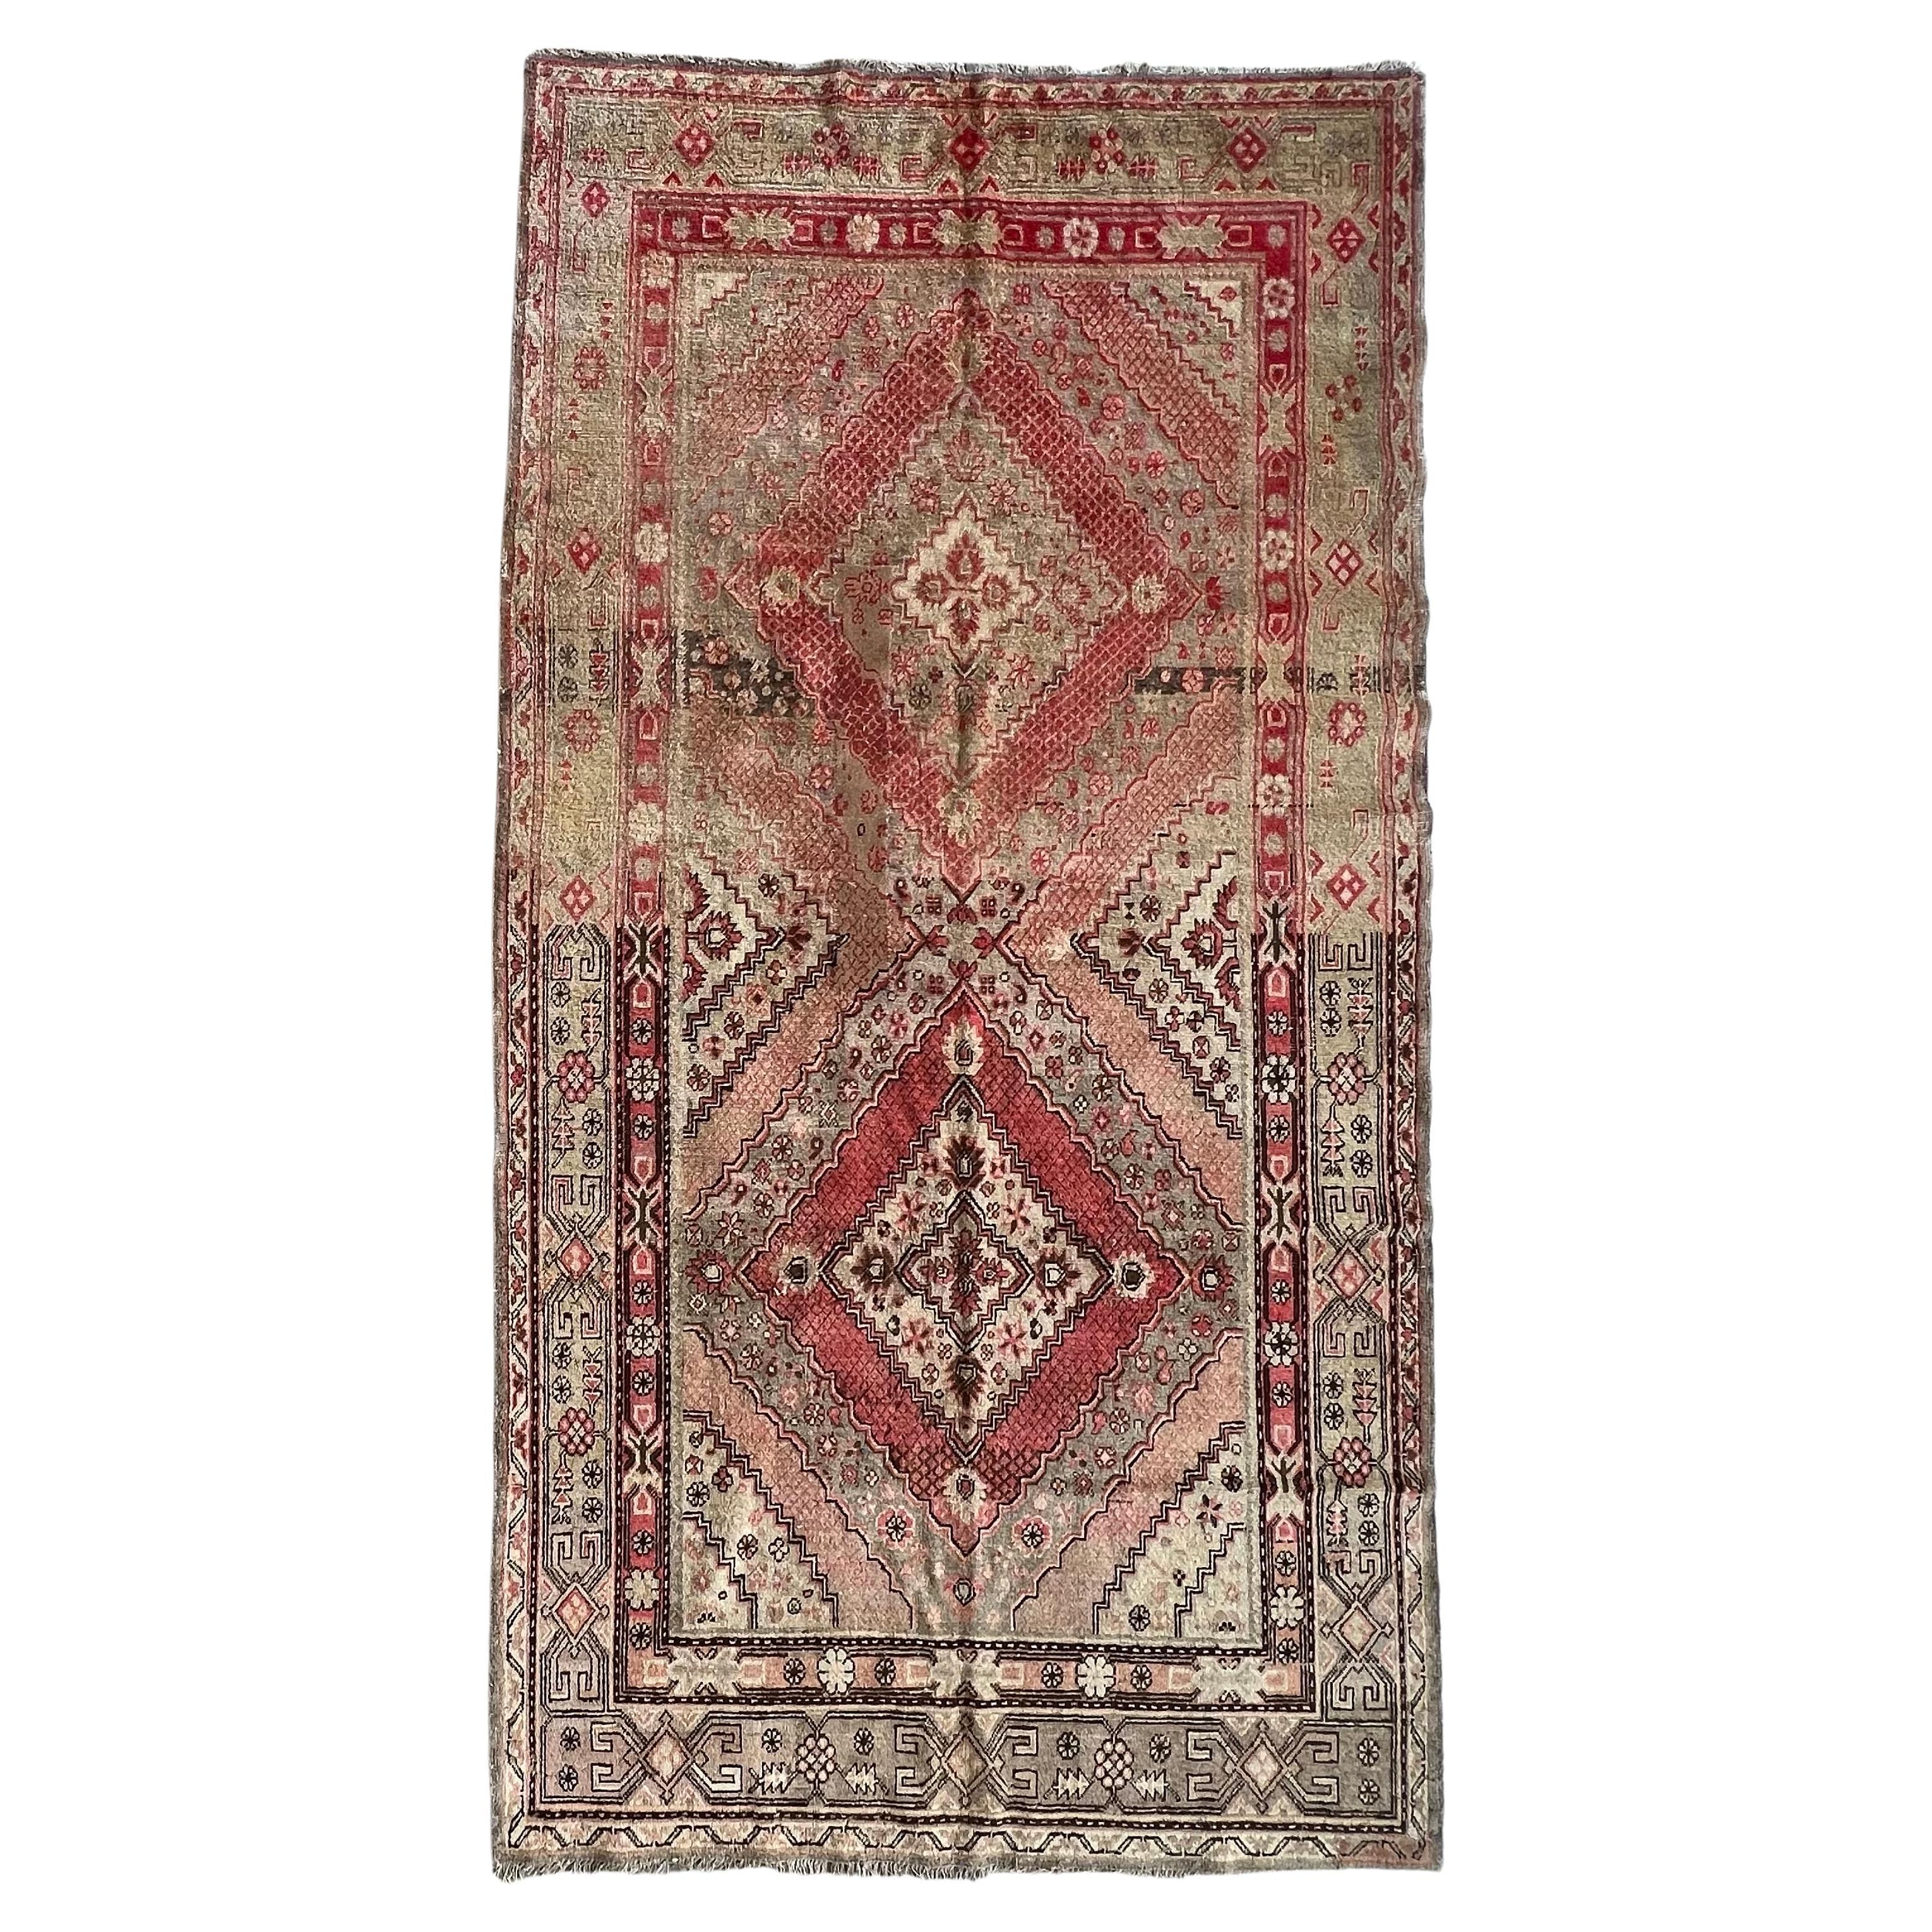 Early 20th Century Antique Khotan Hand Knotted Wool Rug, with Pink Abrash, 1910 For Sale